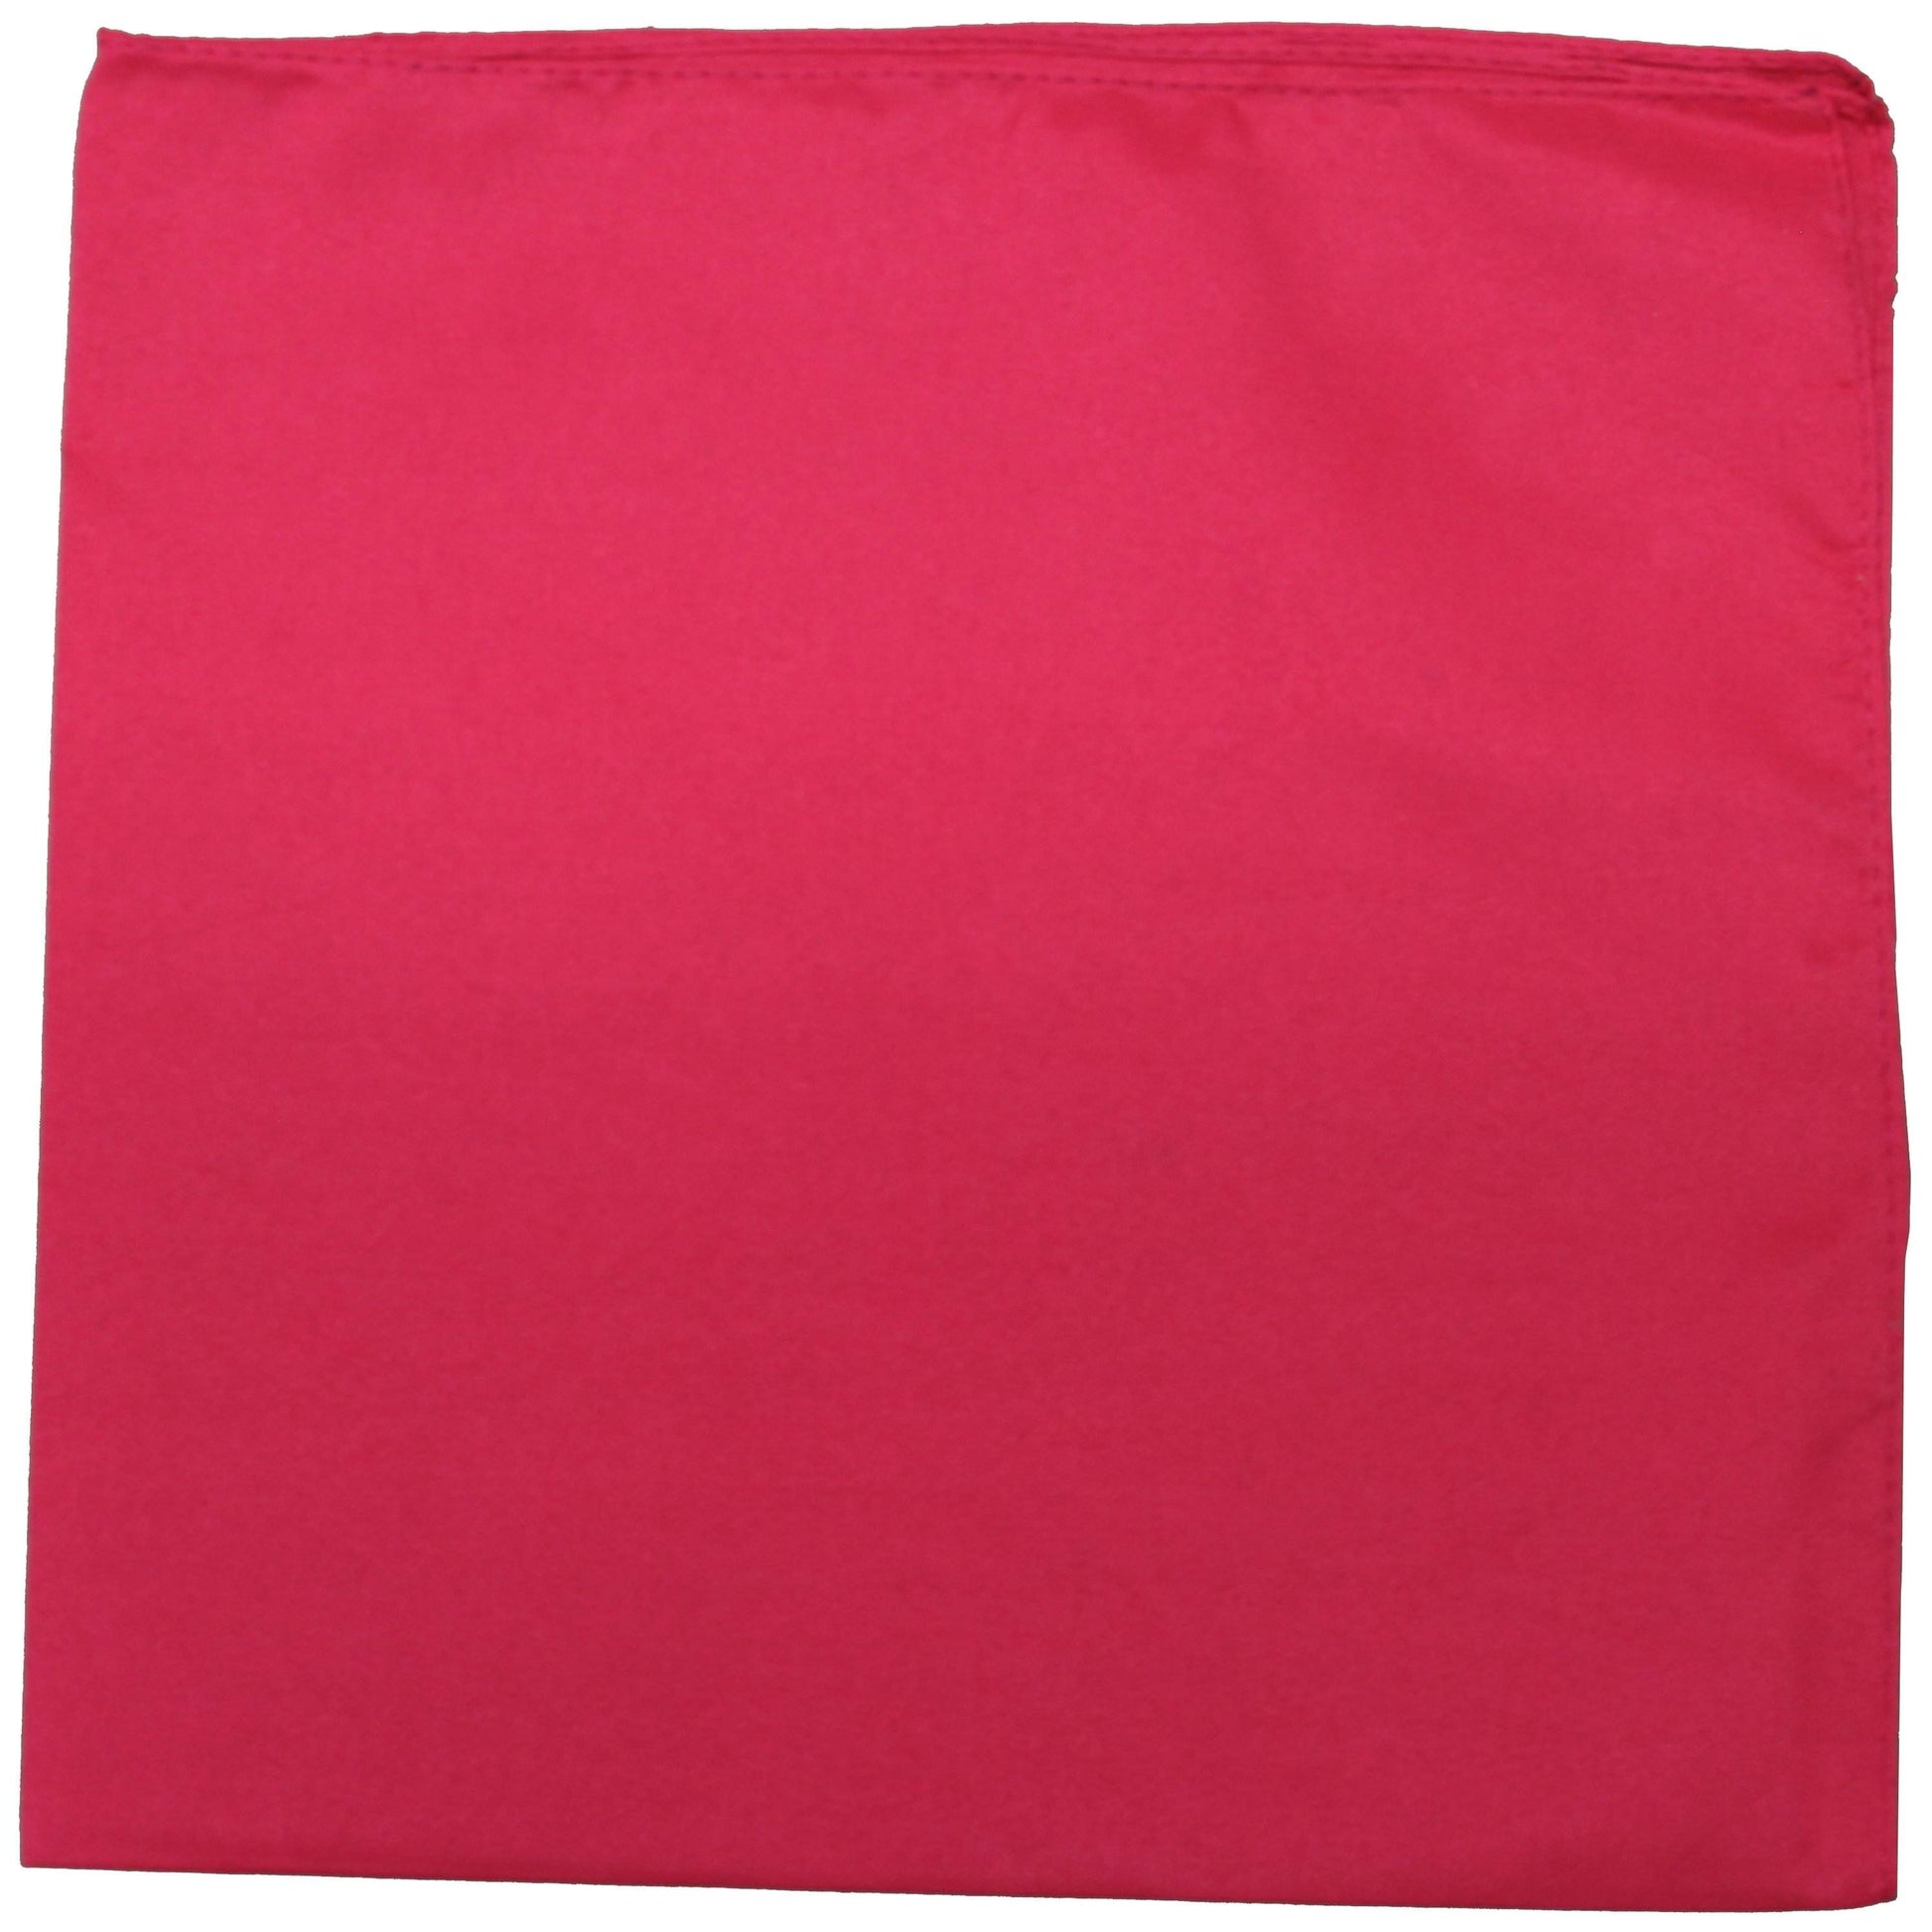 Pack of 10 Plain Polyester 22 x 22 Inch Bandanas